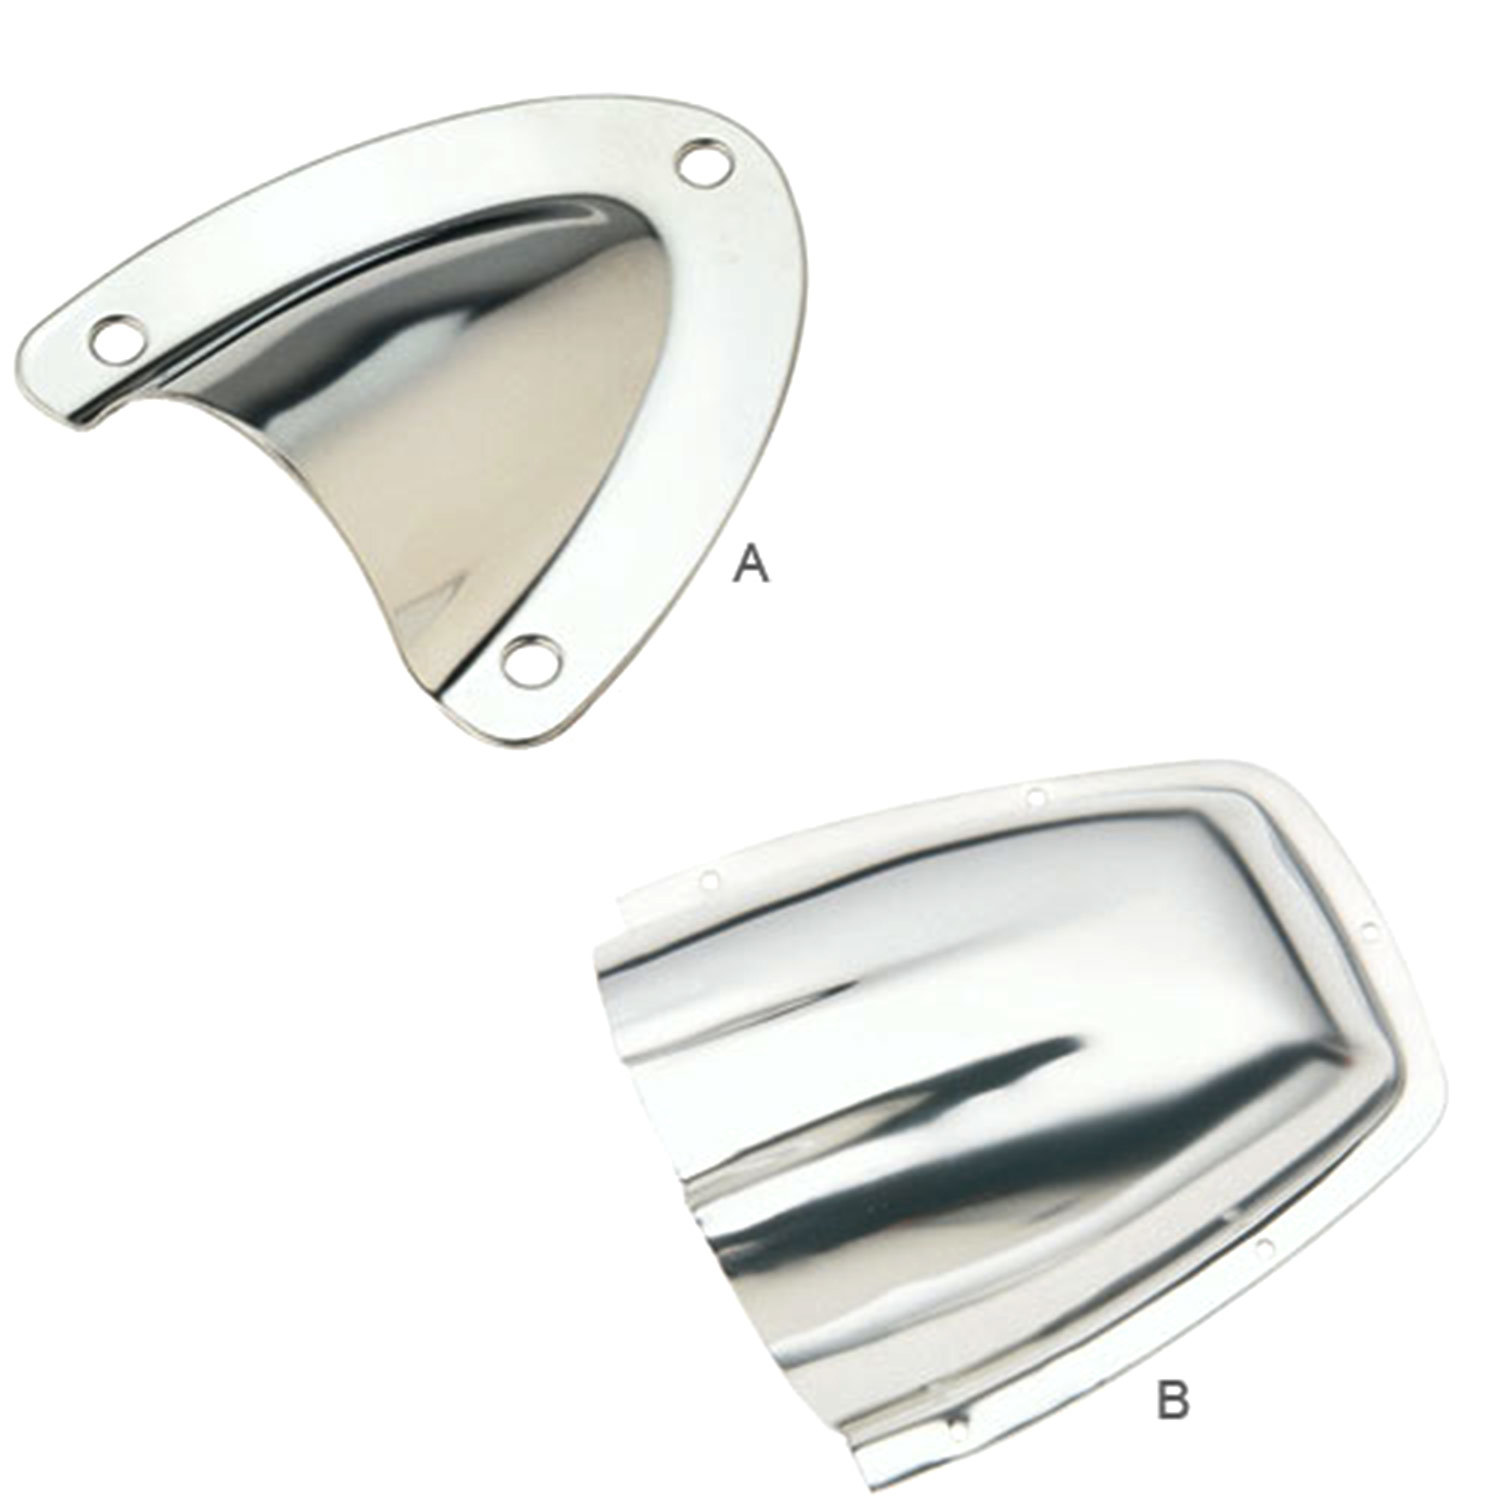 Stainless-Steel Clamshell Vents